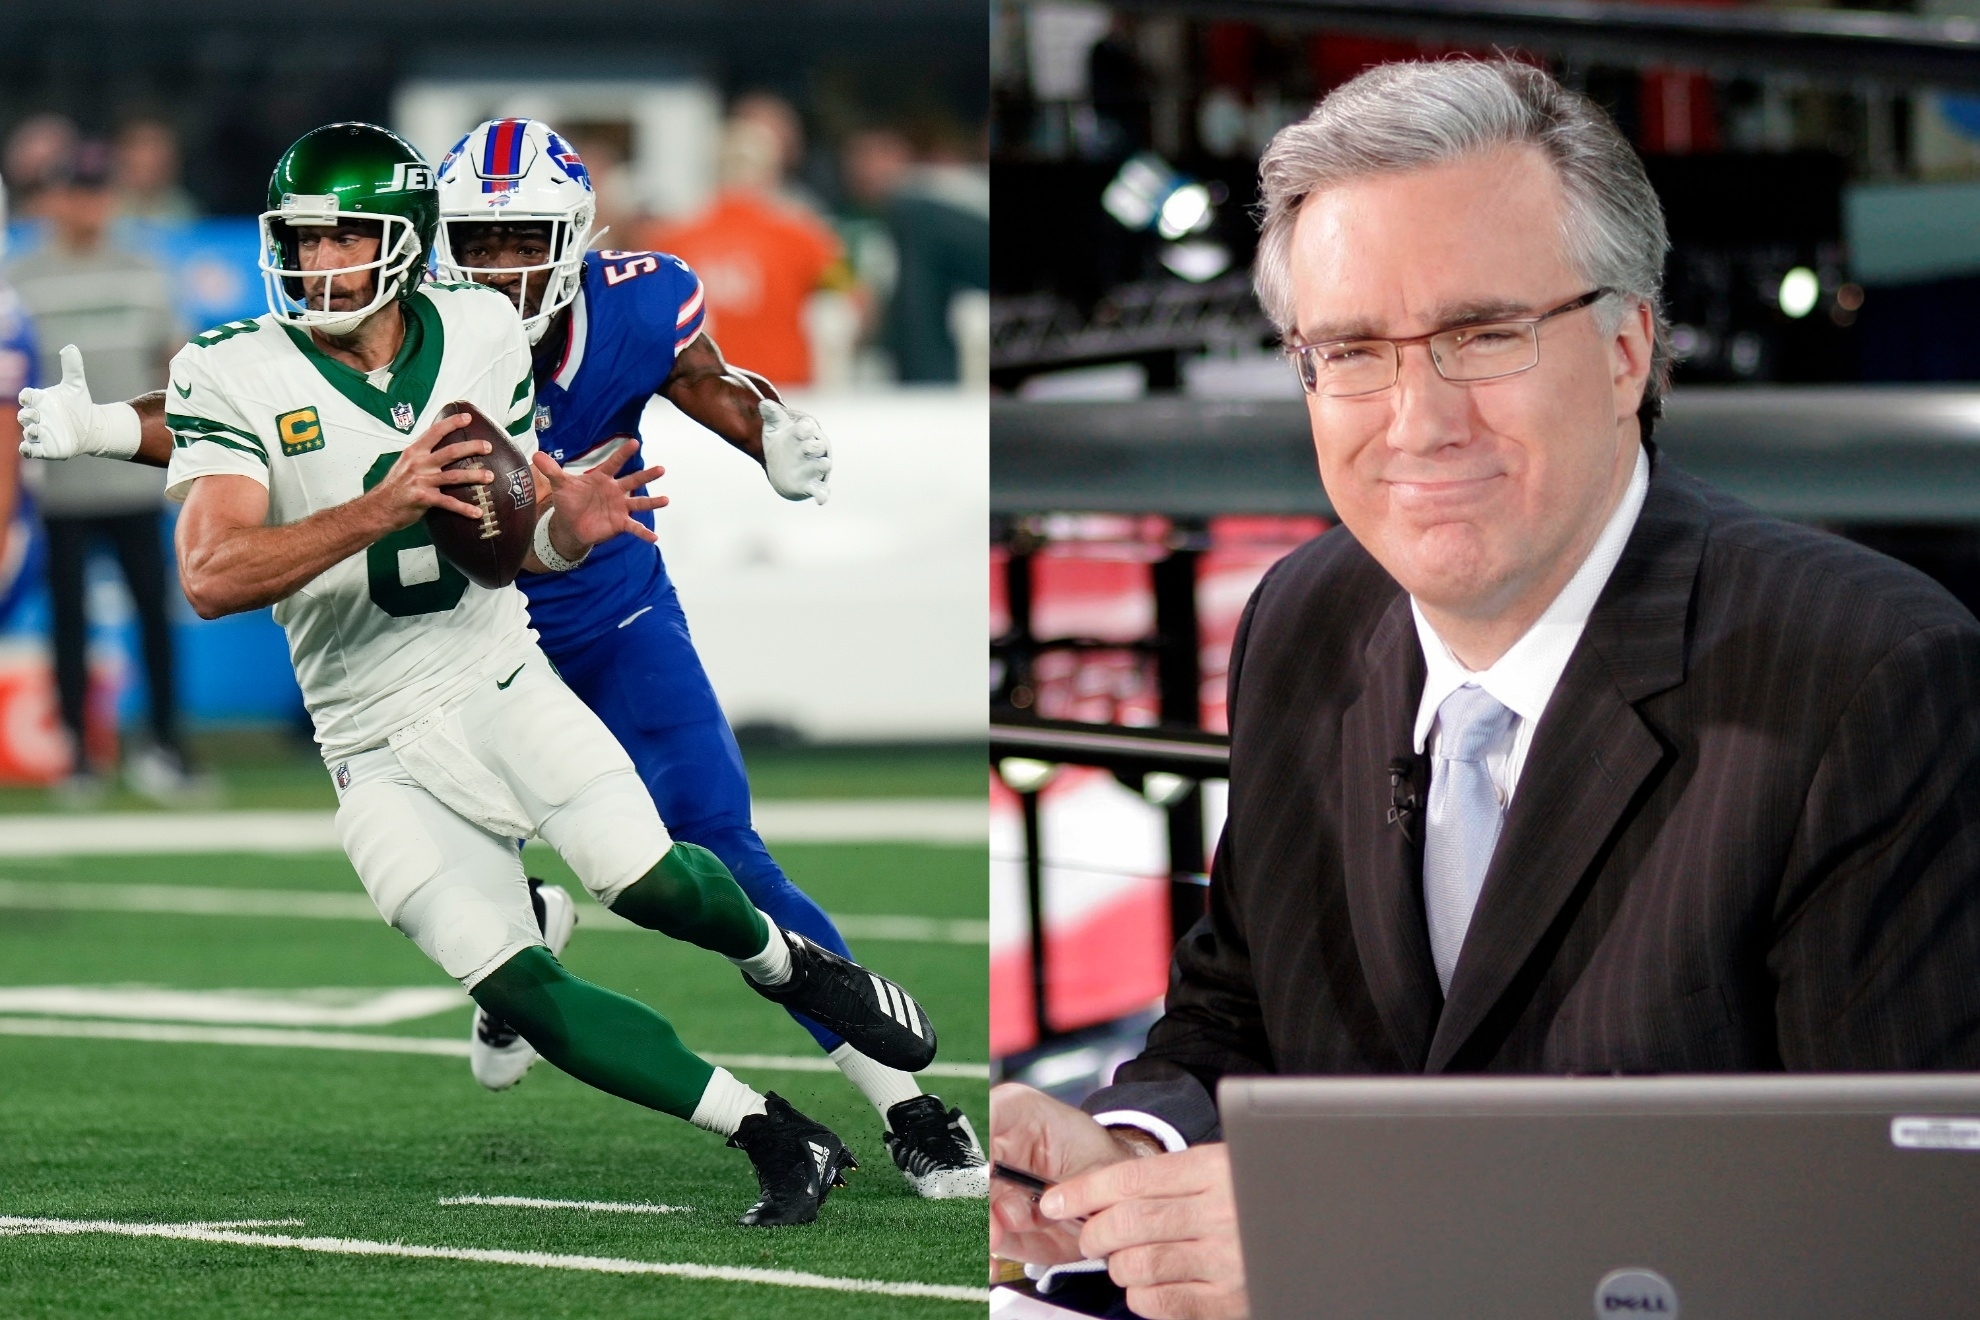 Mashup image of Aaron Rodgers and Keith Olbermann